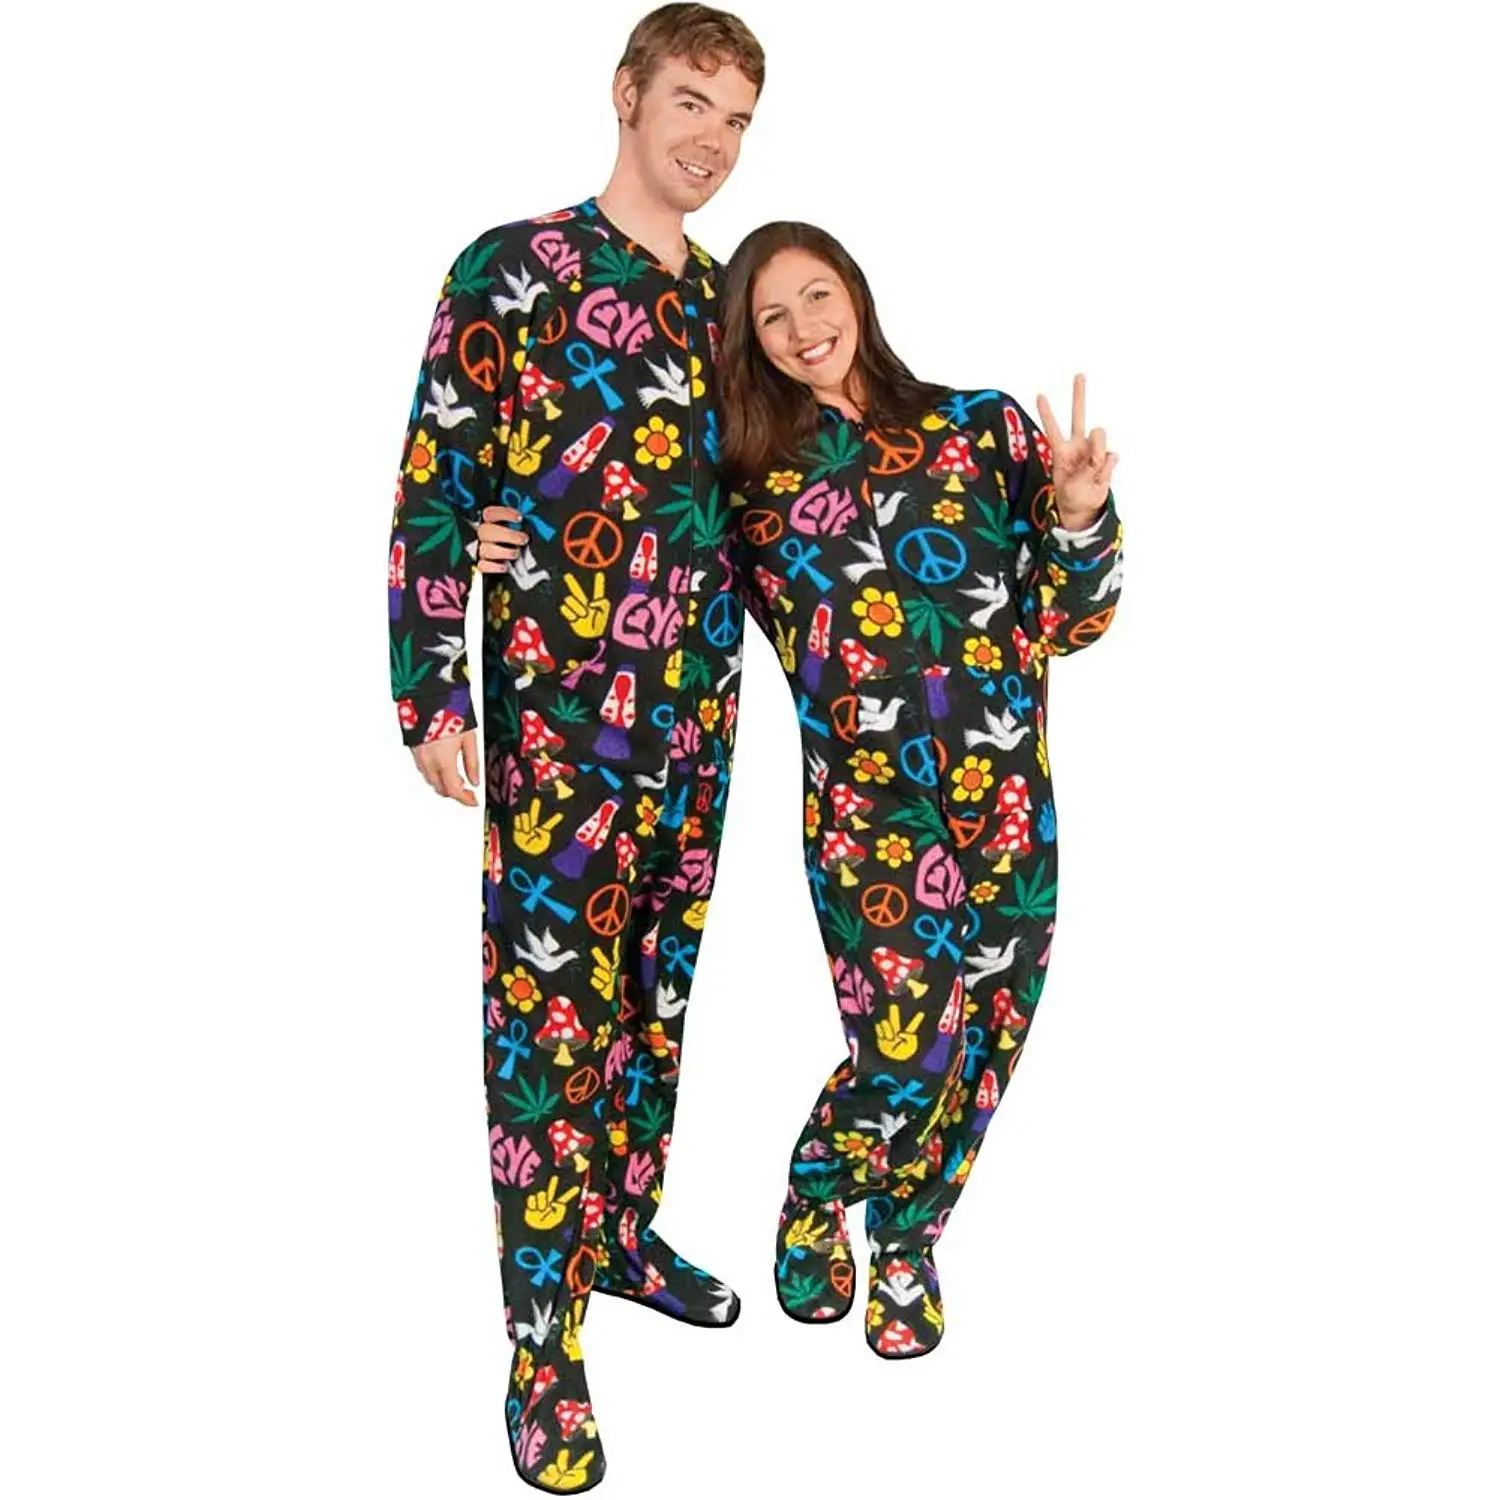 Adult onesie with drop seat